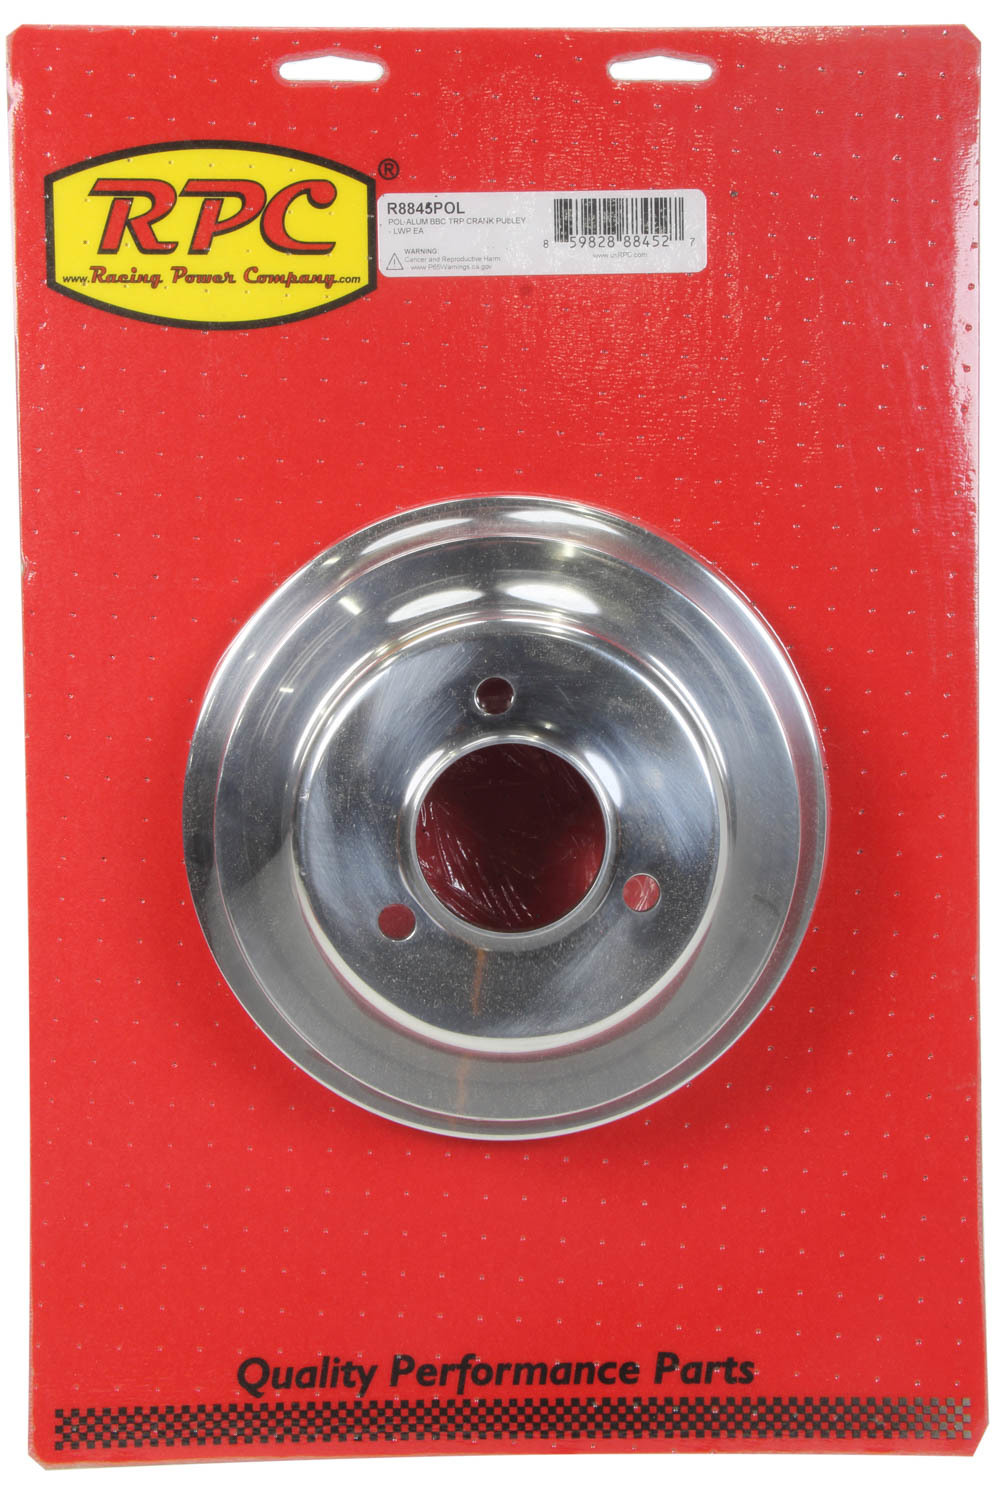 Racing Power Company R8858 Chrome SWP Single Groove Pulley for Small Block Chevy